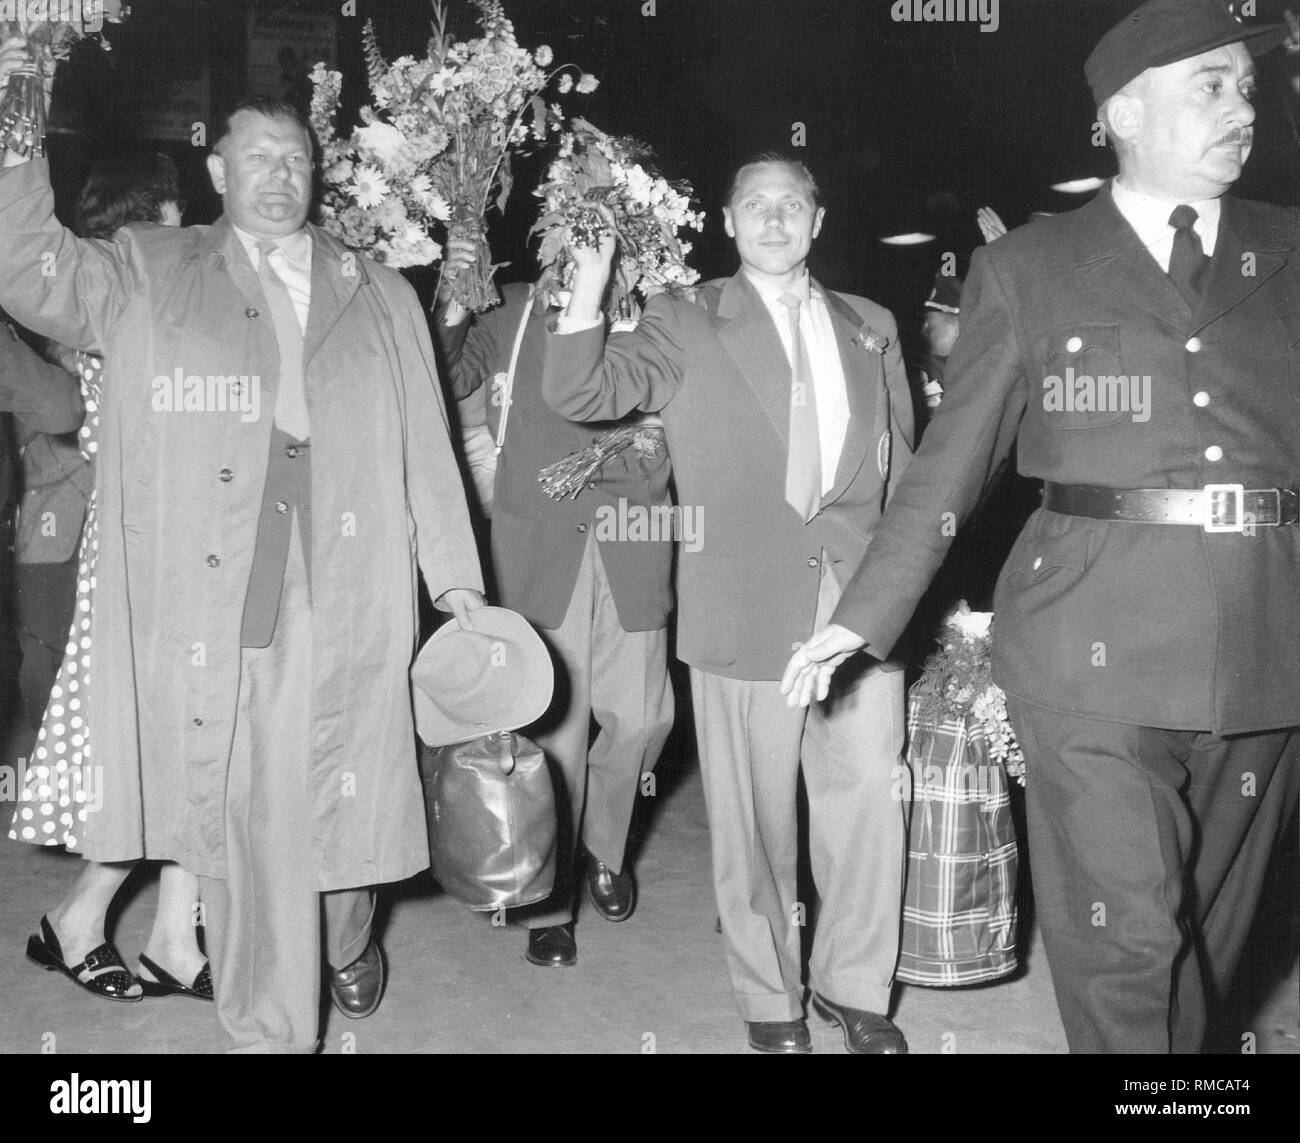 Arrival of the team in Lindau. DFB Vice-President Huber and Max Morlock welcome the fans. In 1954 Germany won its first World Cup in Switzerland. Stock Photo